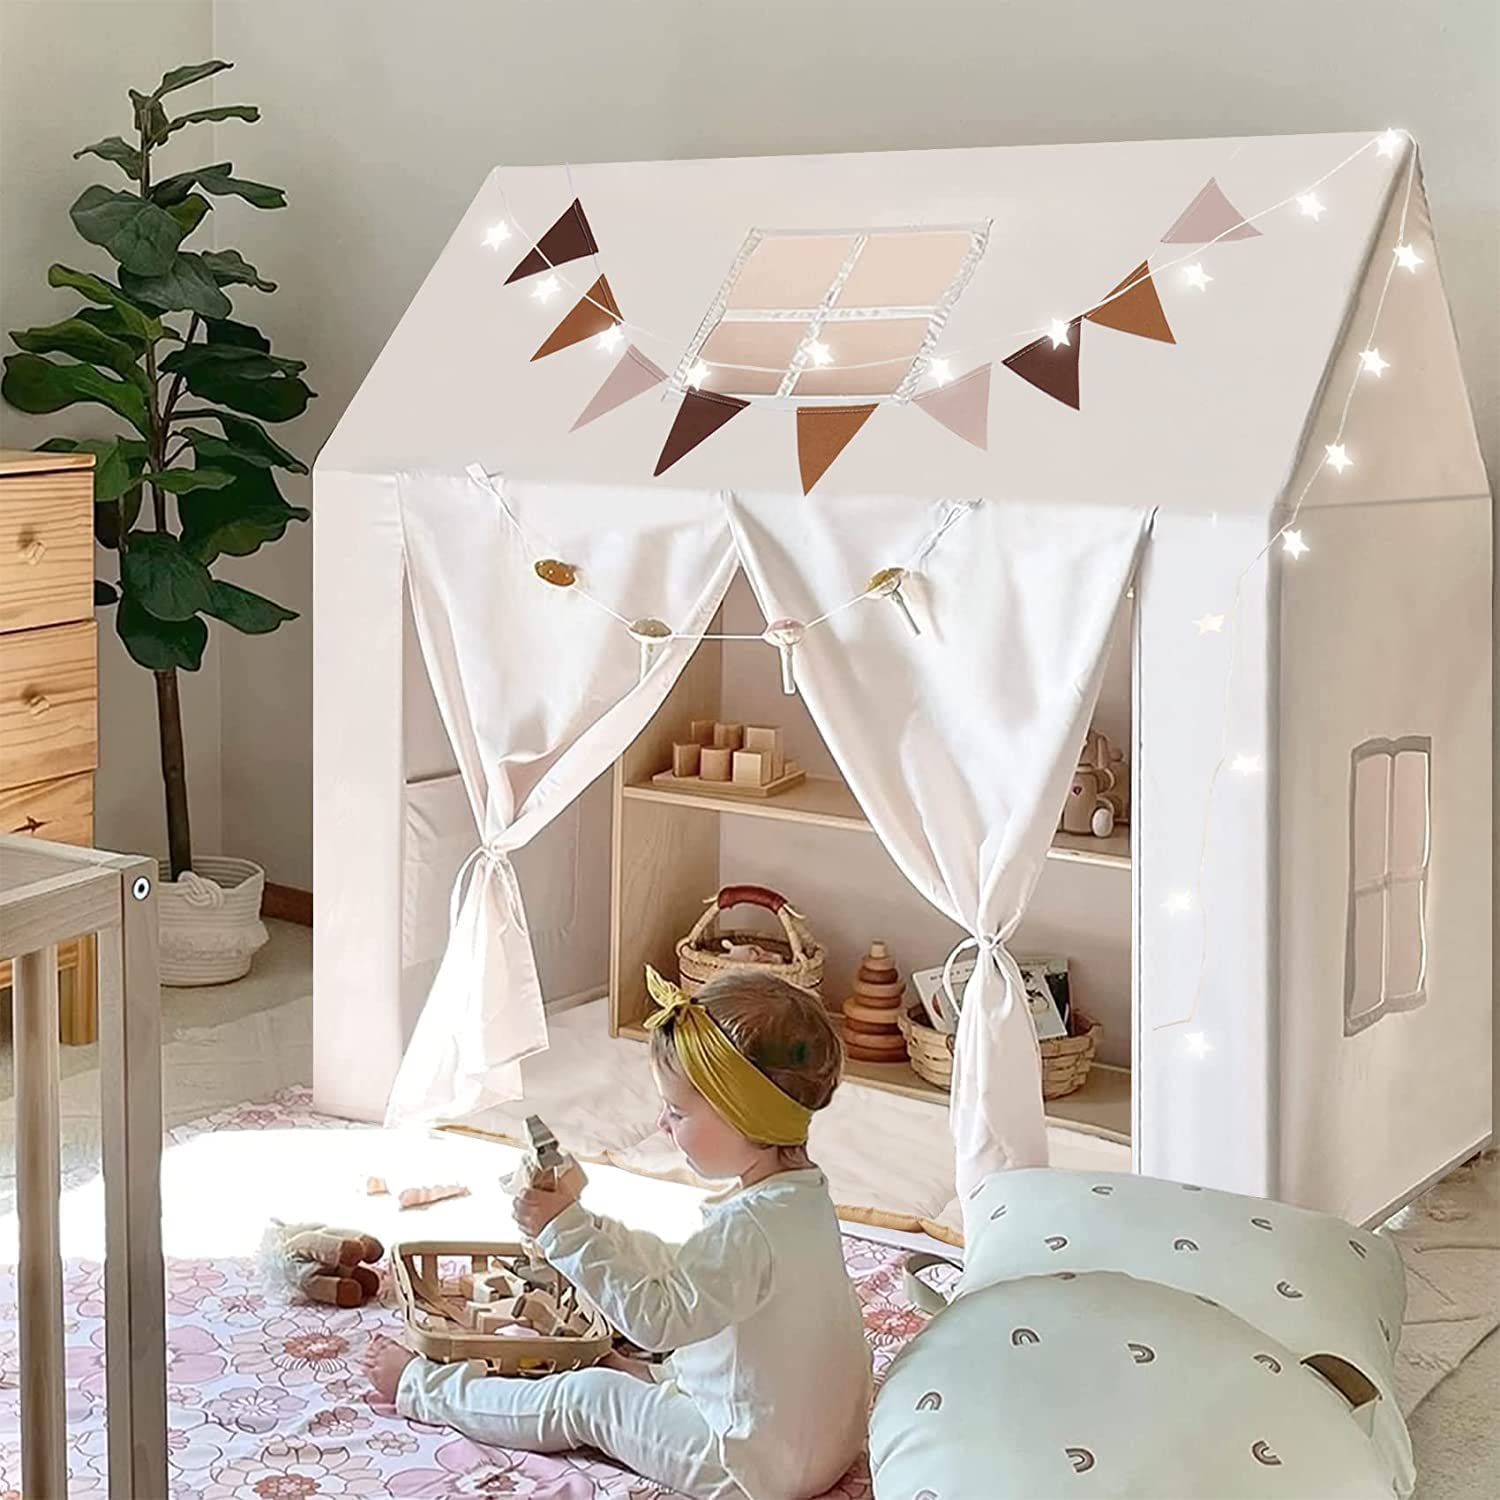 kid play forts